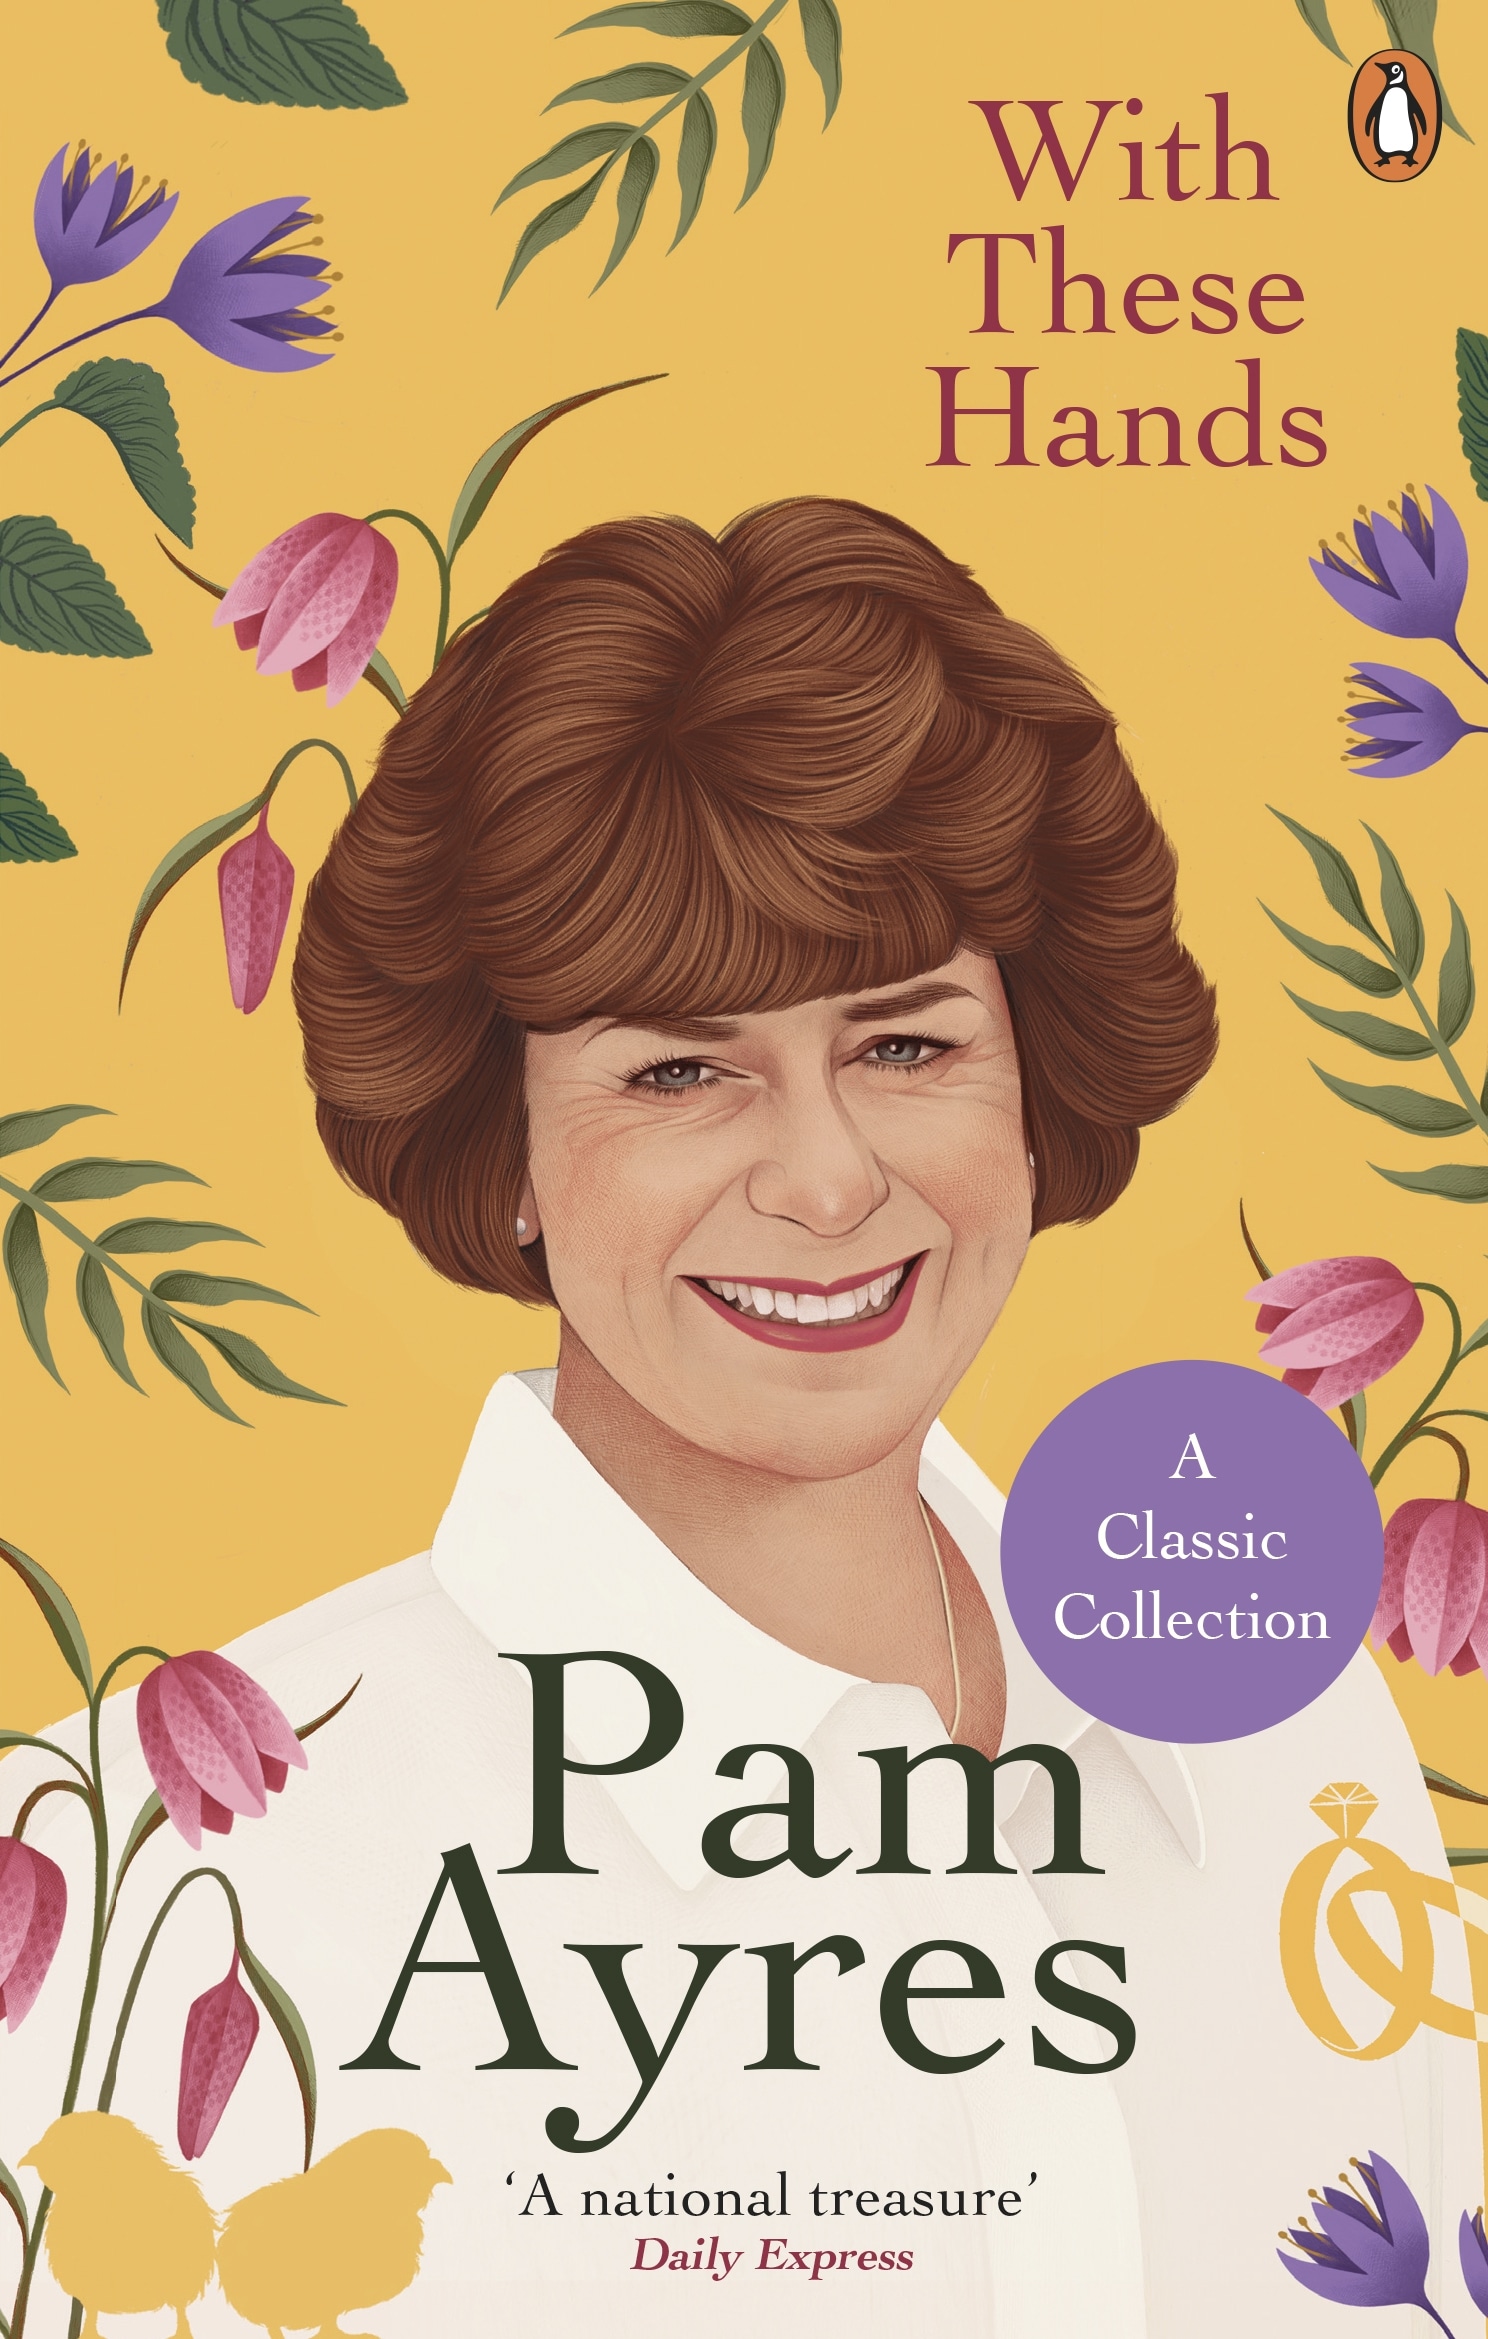 Book “With These Hands” by Pam Ayres — March 4, 2021